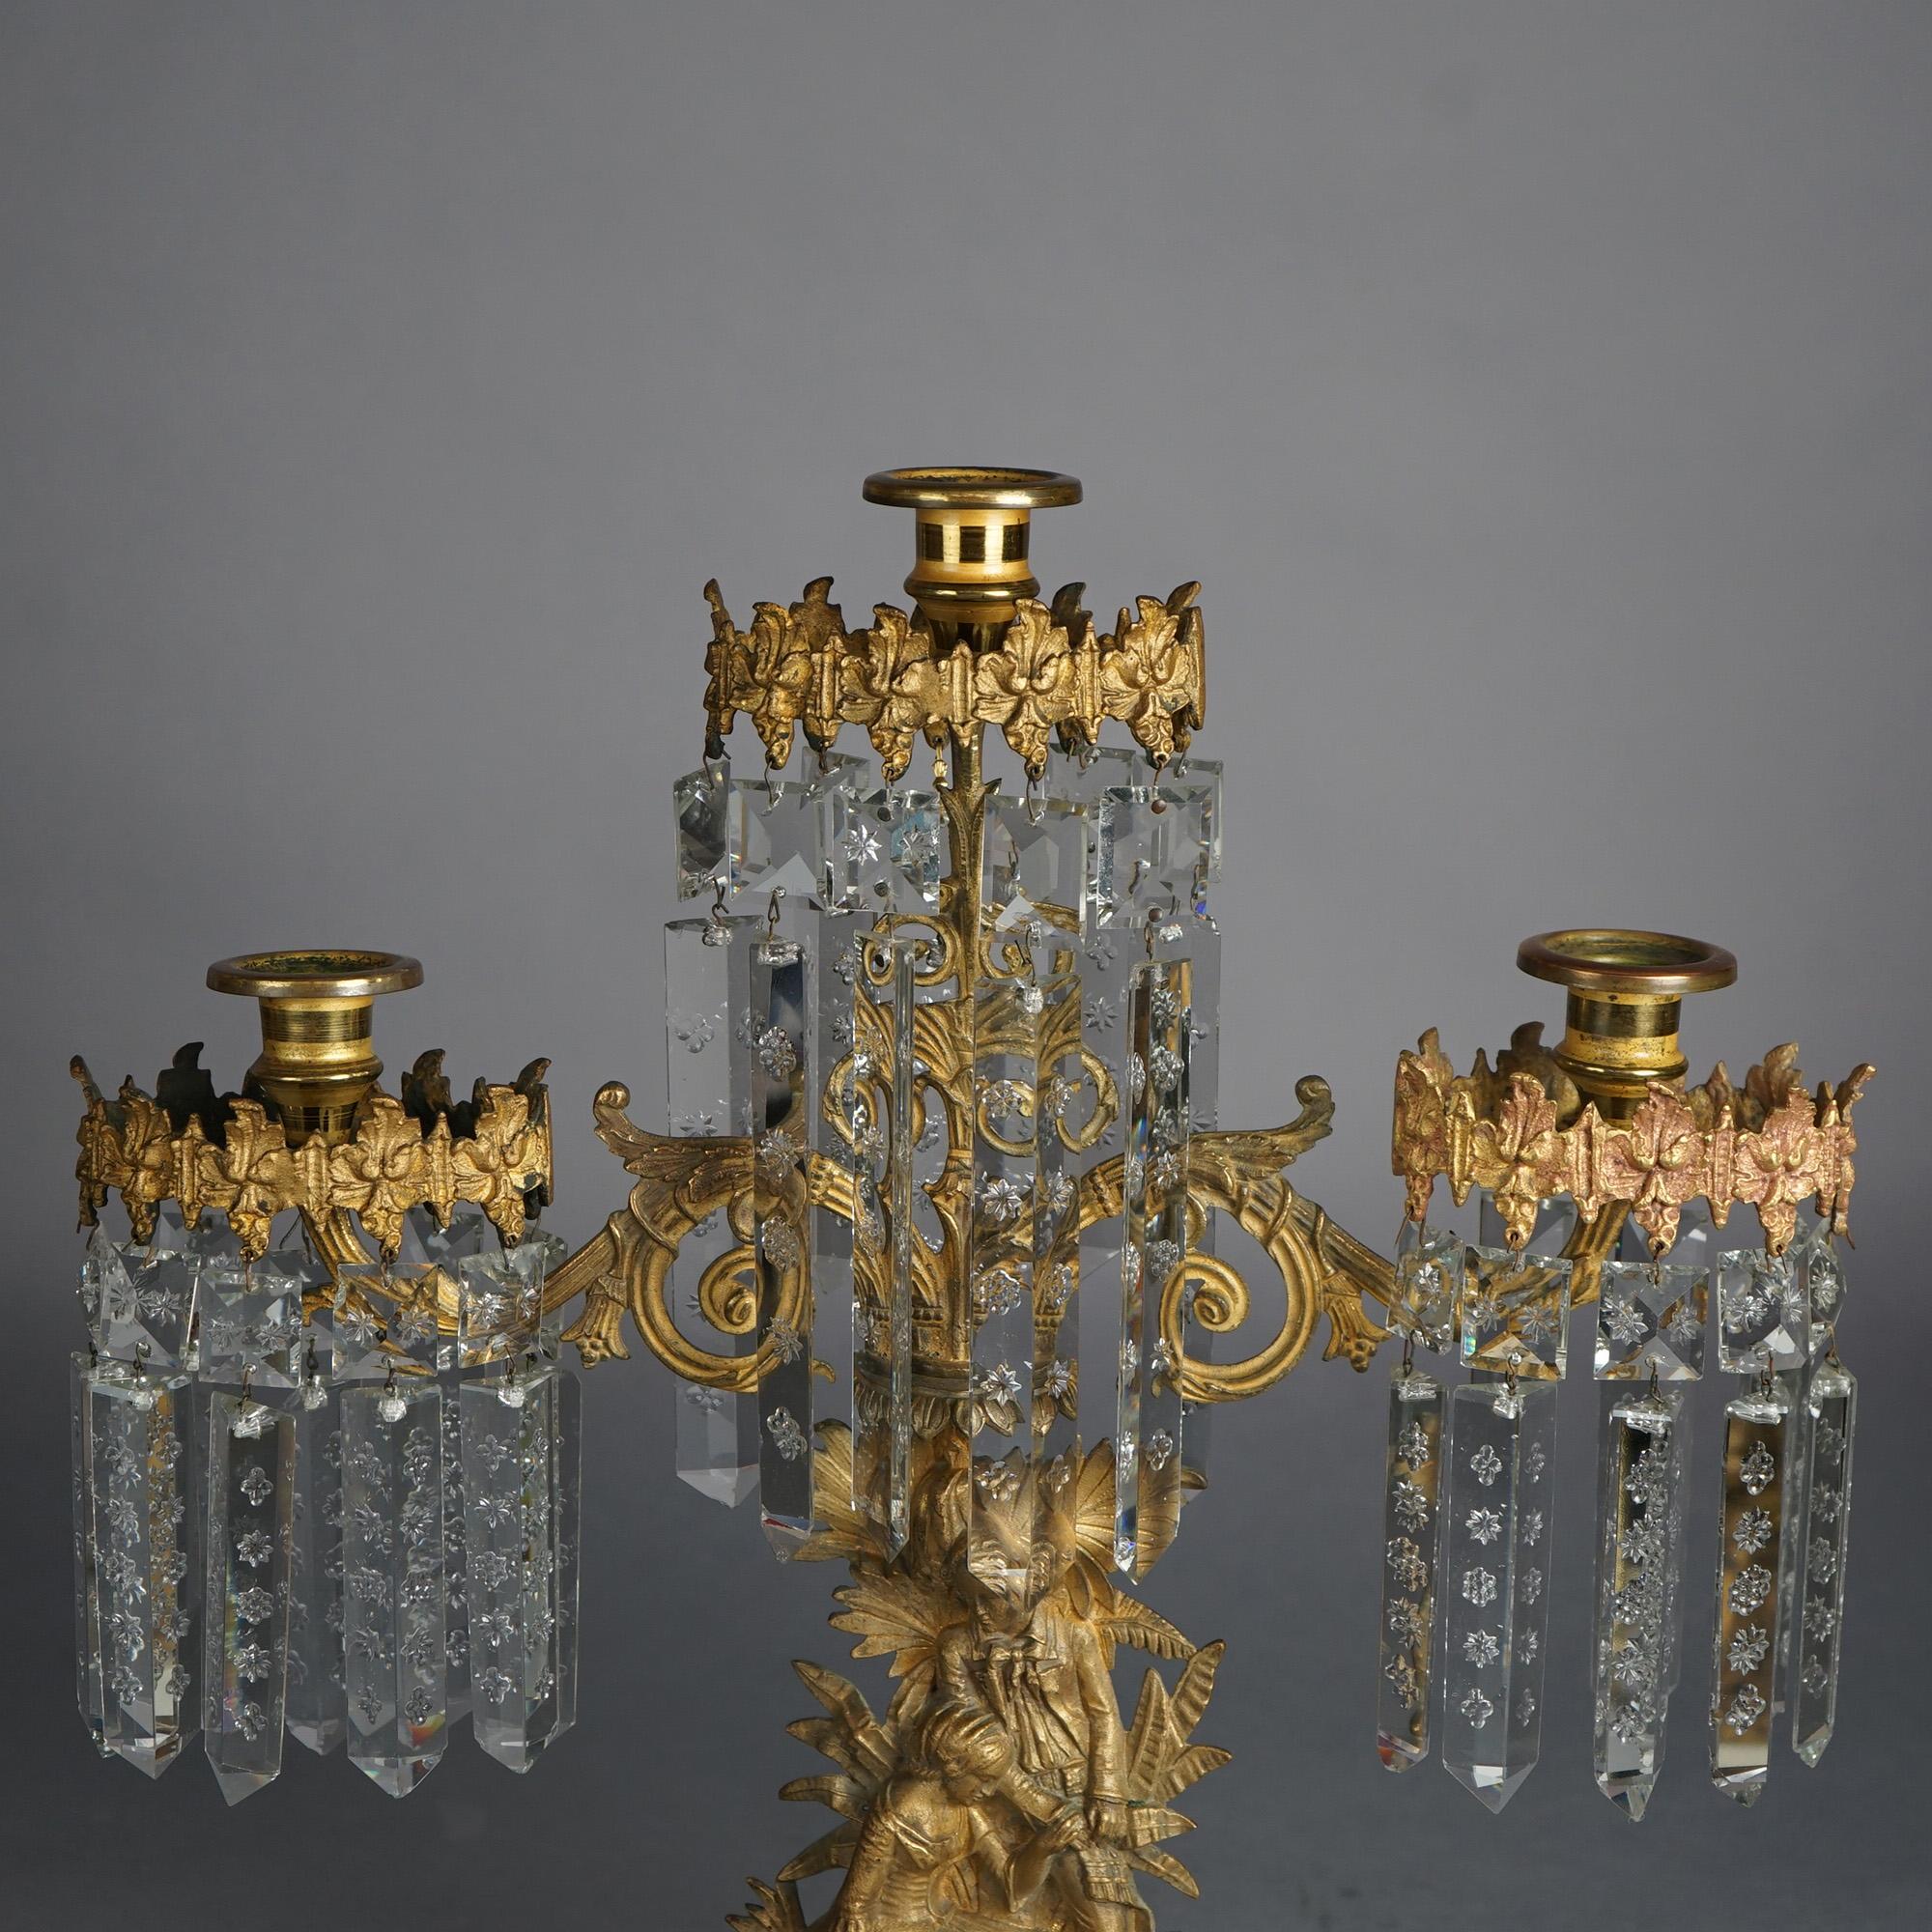 Antique Gilt Bronze American Girandole Candelabras with Marble & Crystals C1880 For Sale 8